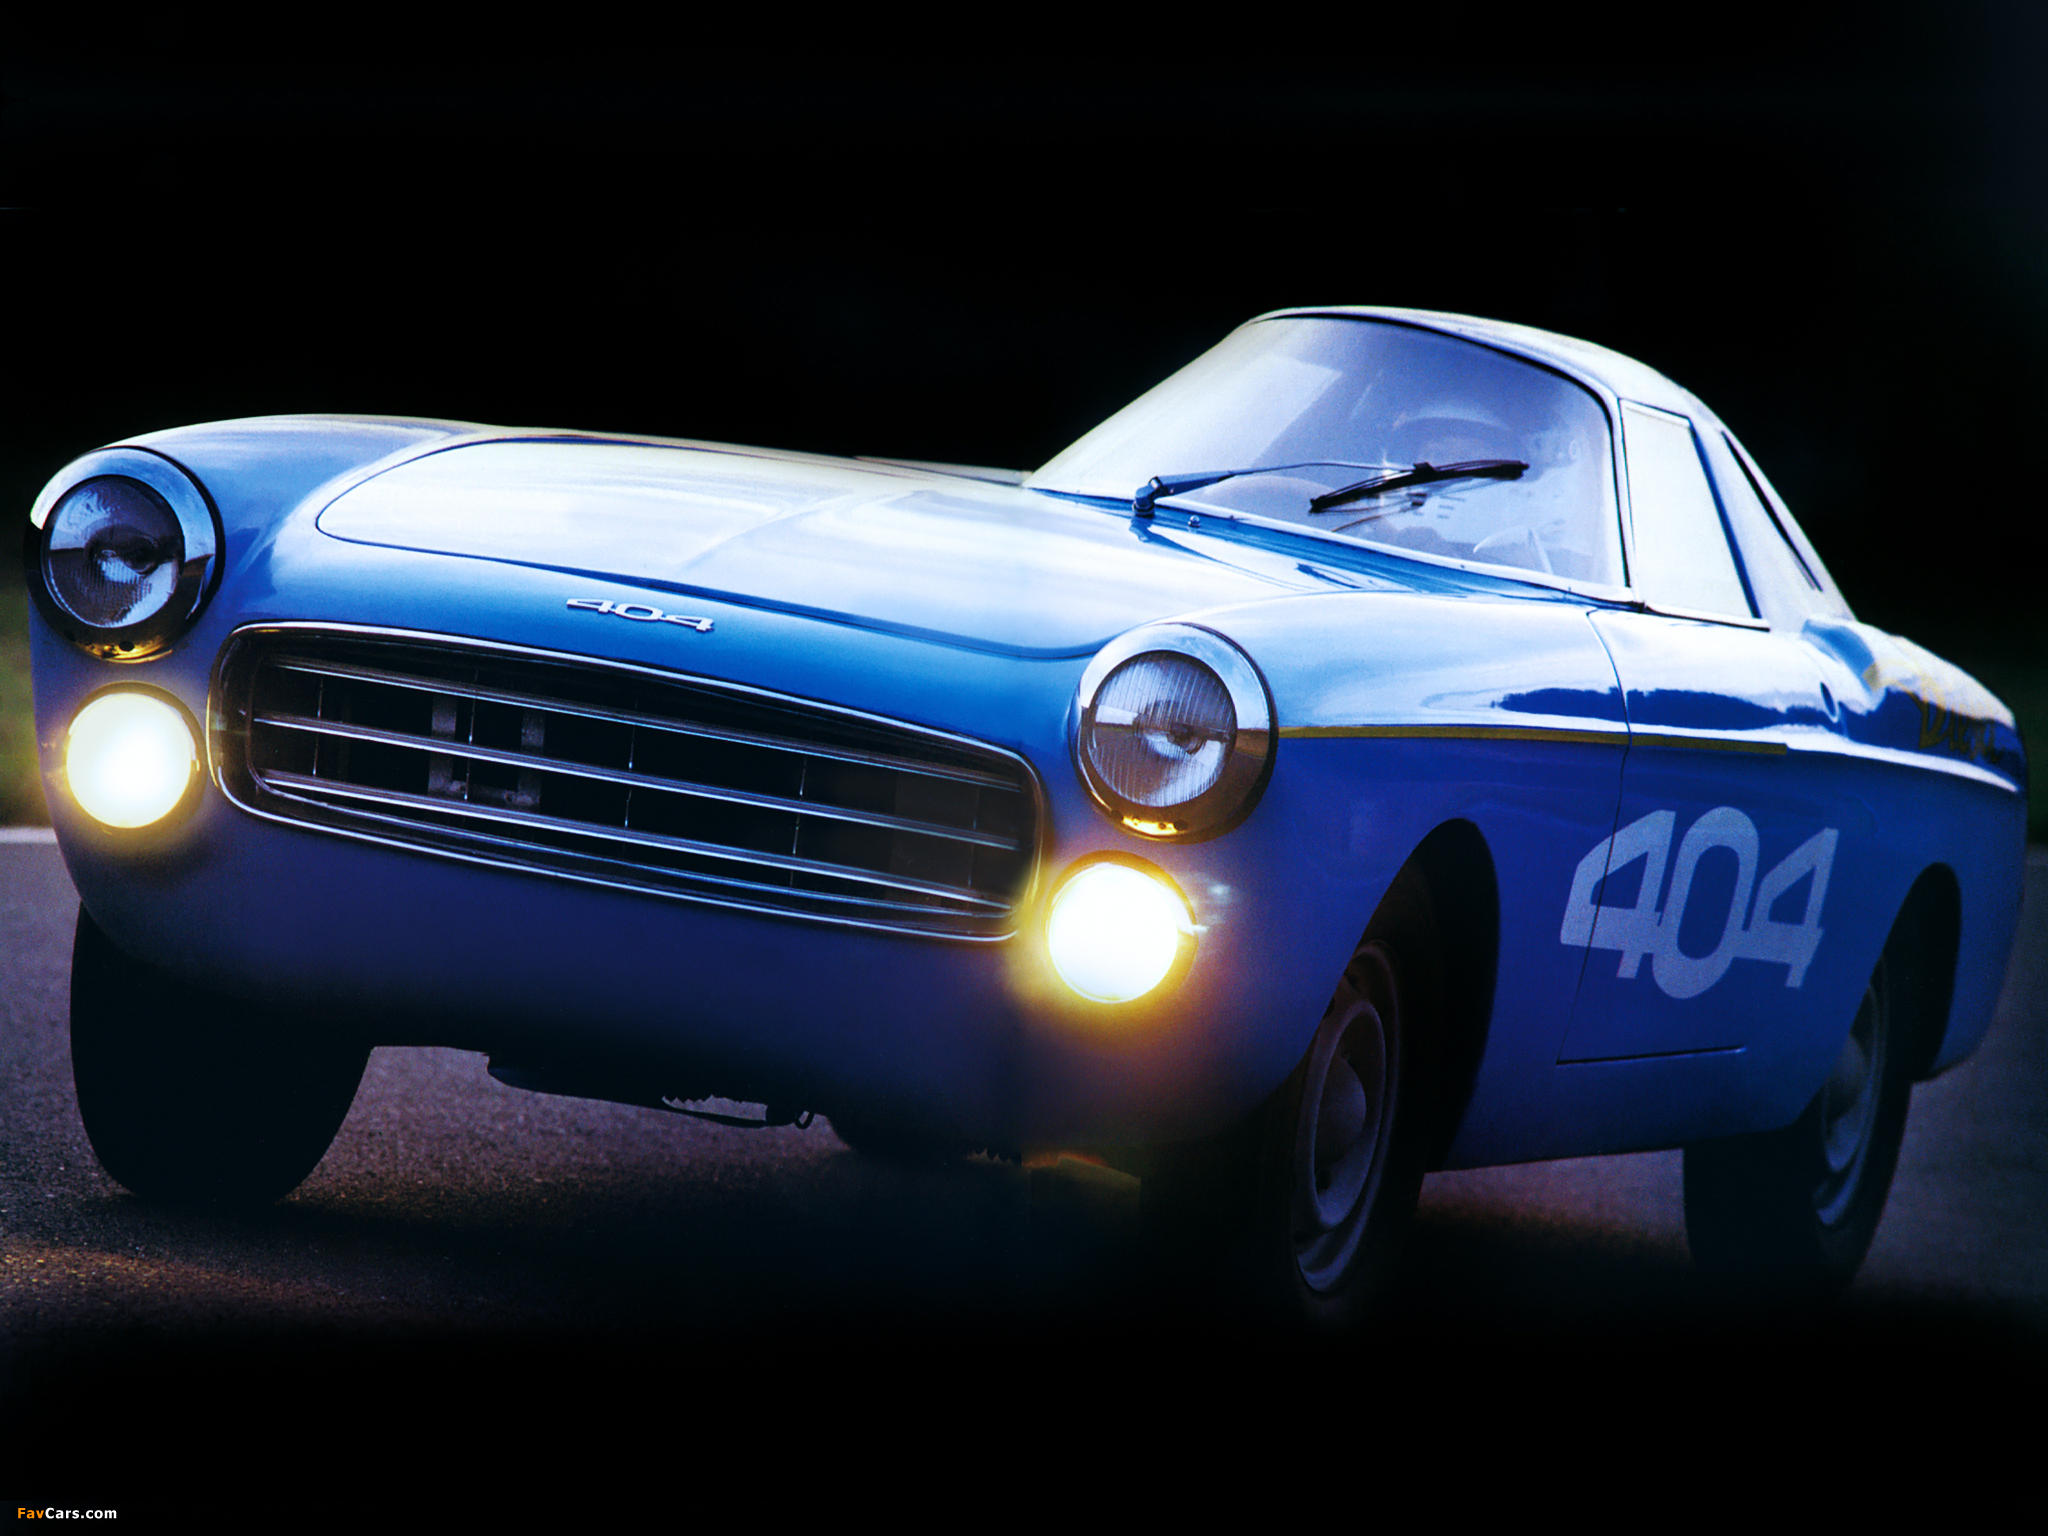 Peugeot 404 Diesel Record Car 1965 pictures (2048 x 1536)